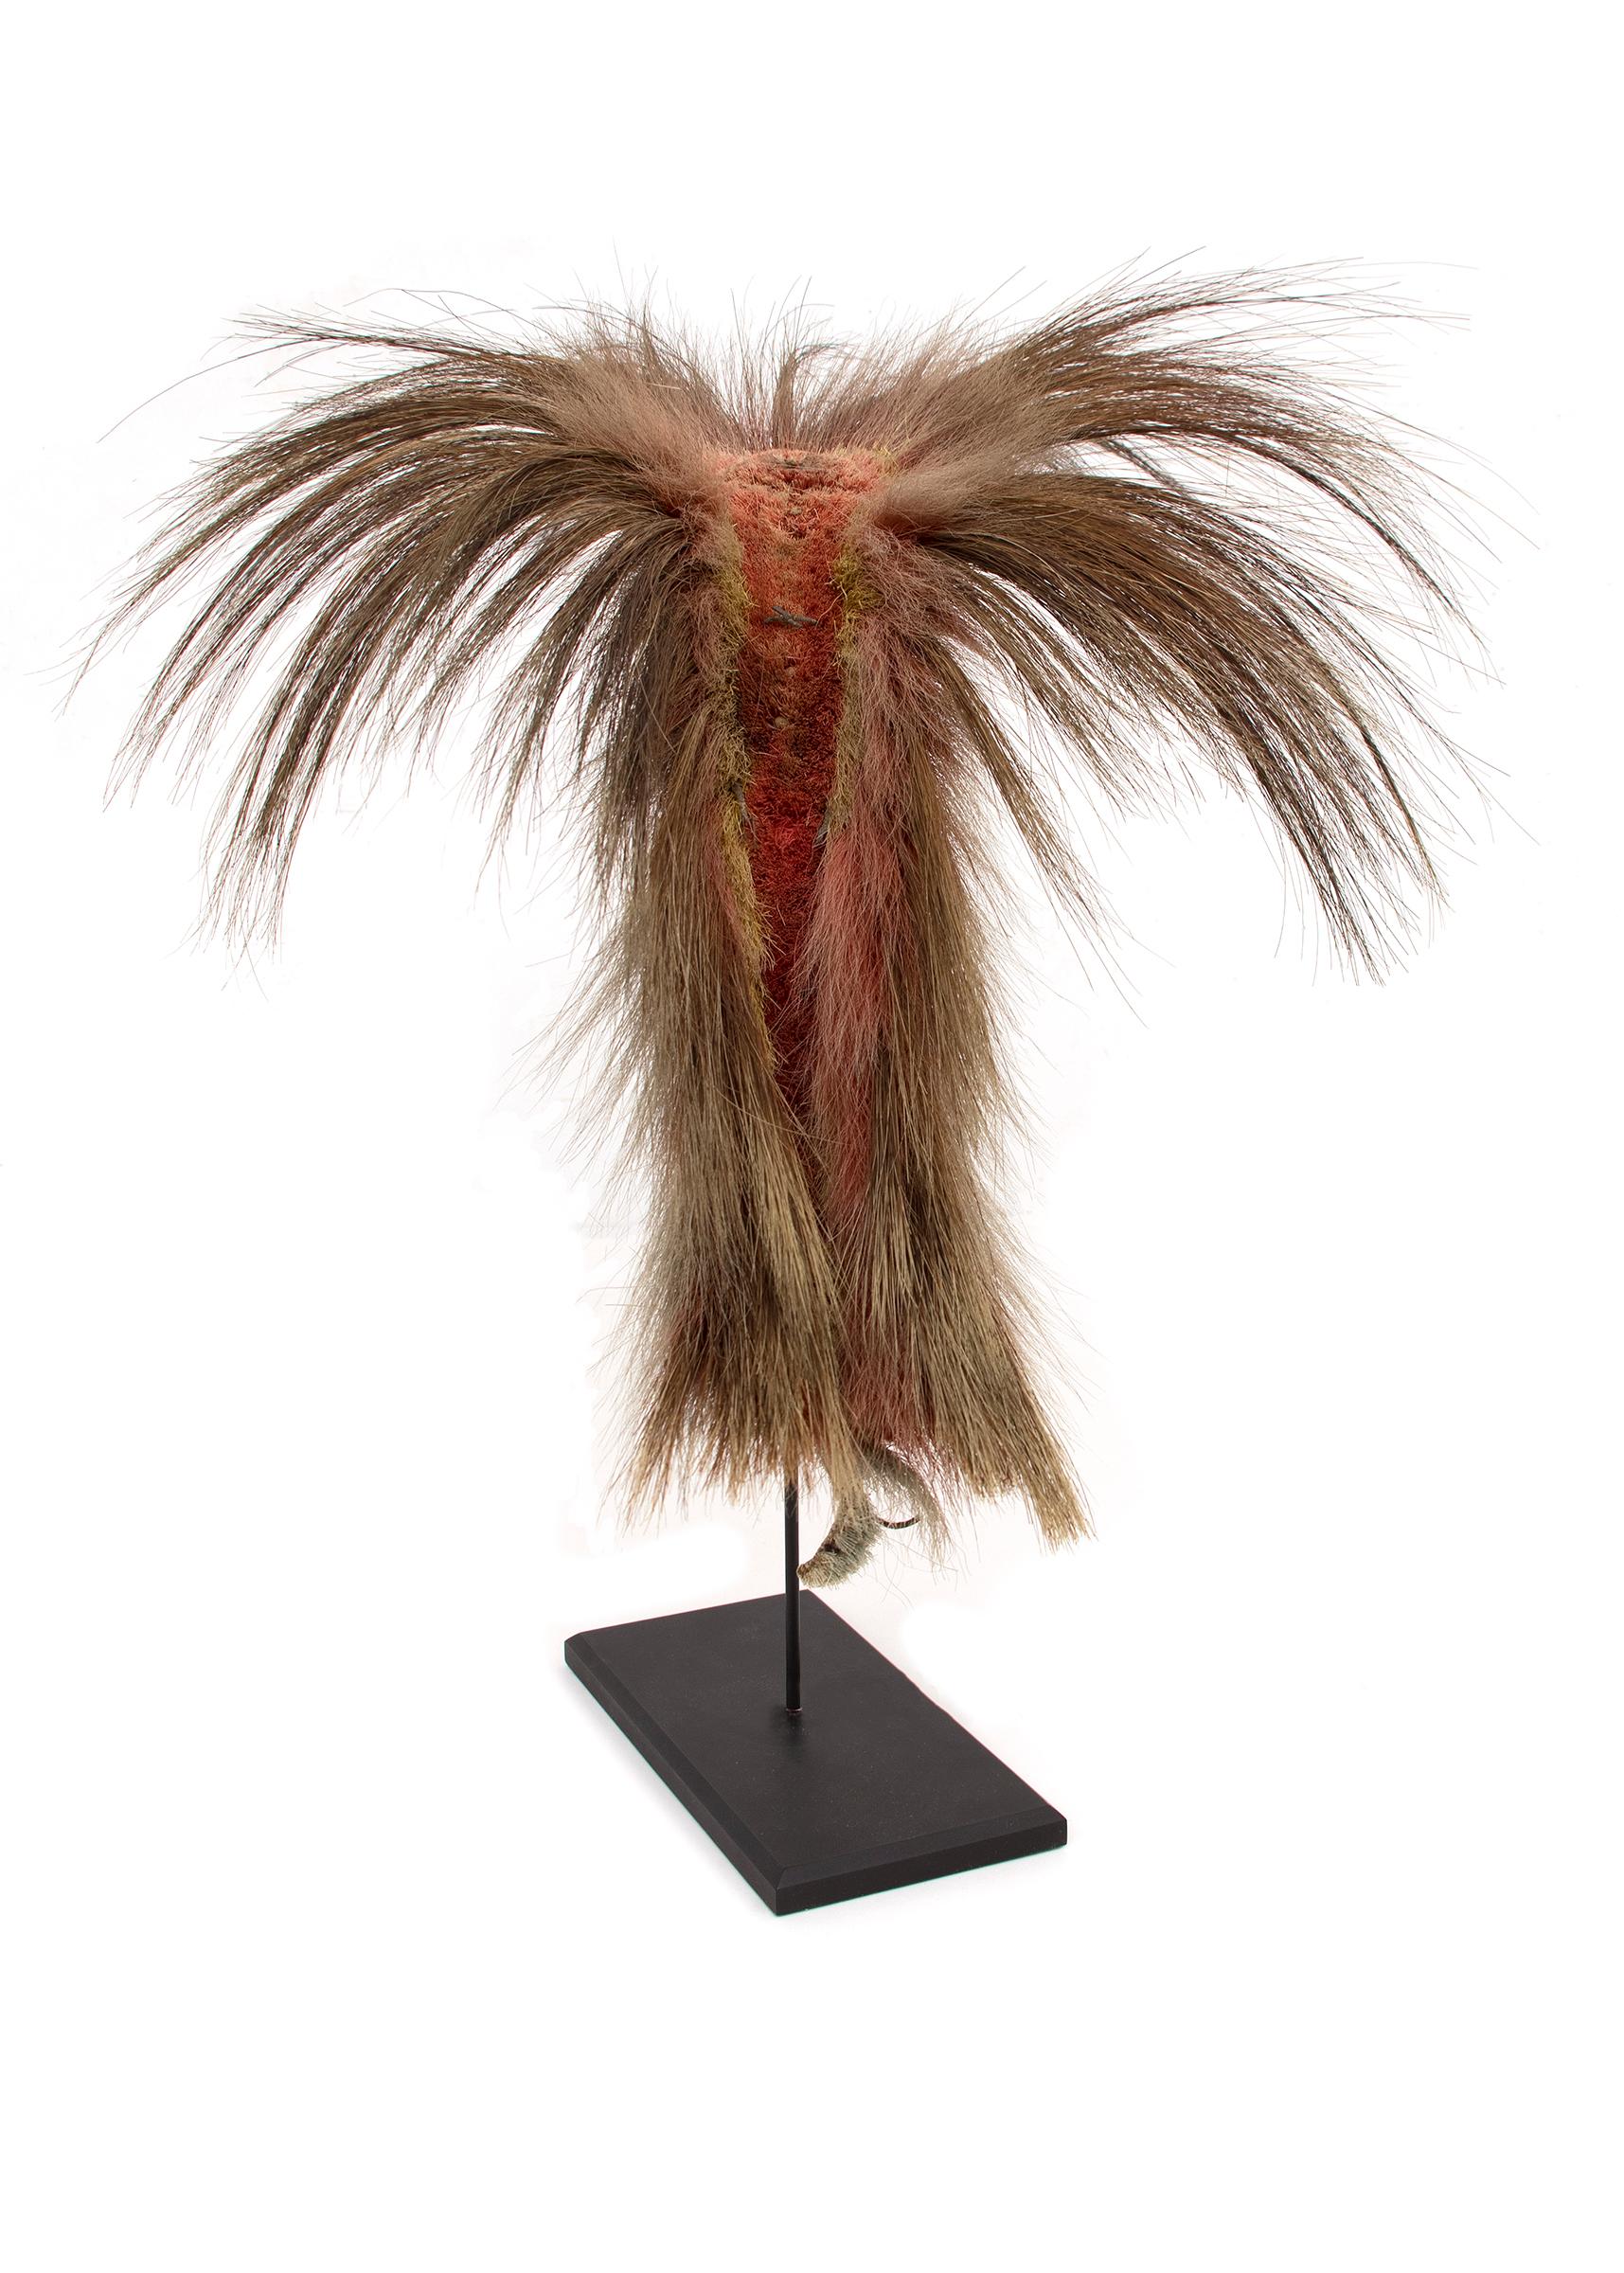 Roach Headdress, Antique Native American, Plains Indian, 19th Century In Good Condition For Sale In Denver, CO